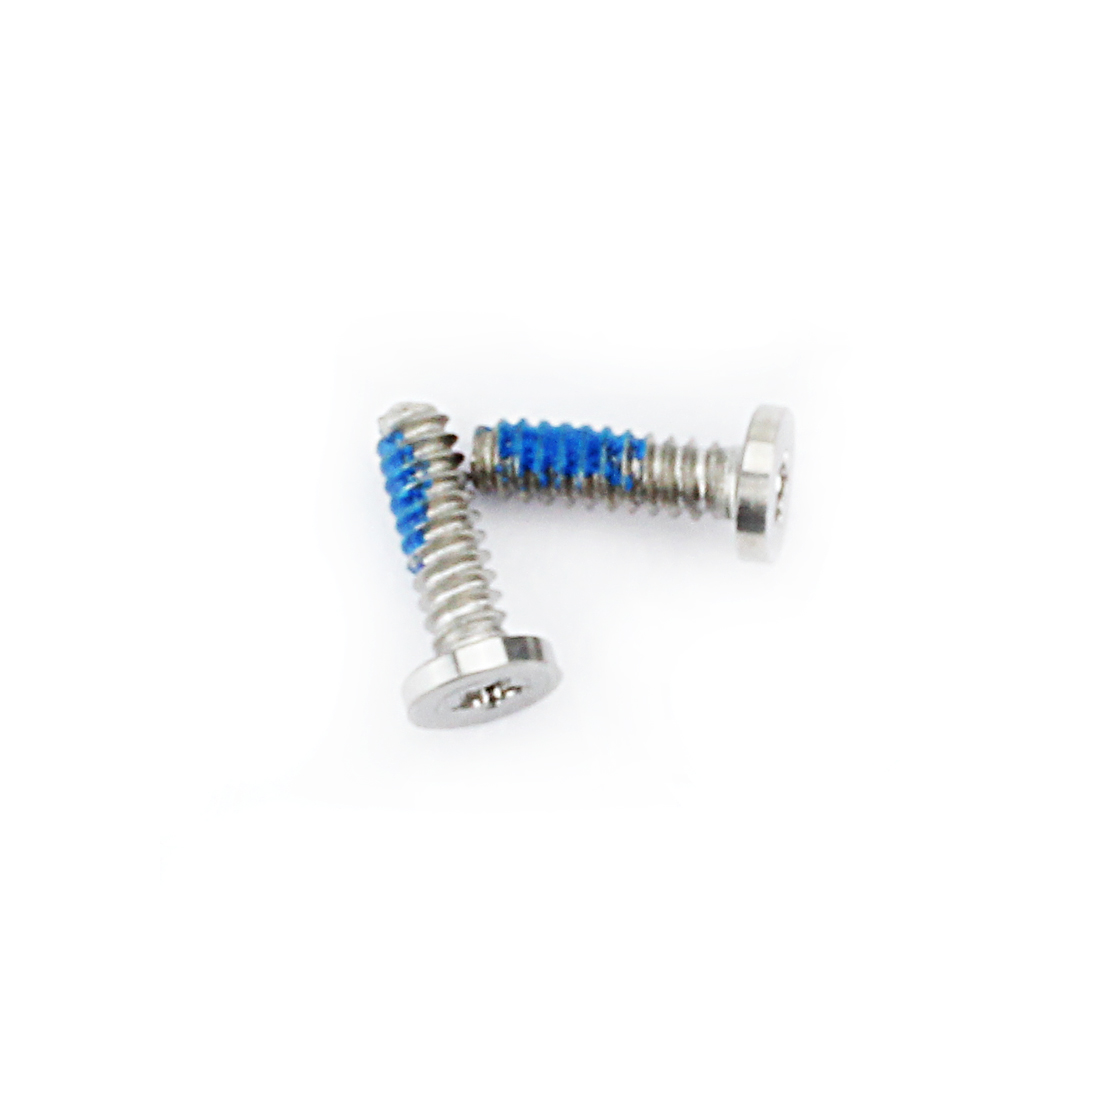 Housing Screws 2 Pcs., compatible with iPhone 4/4S